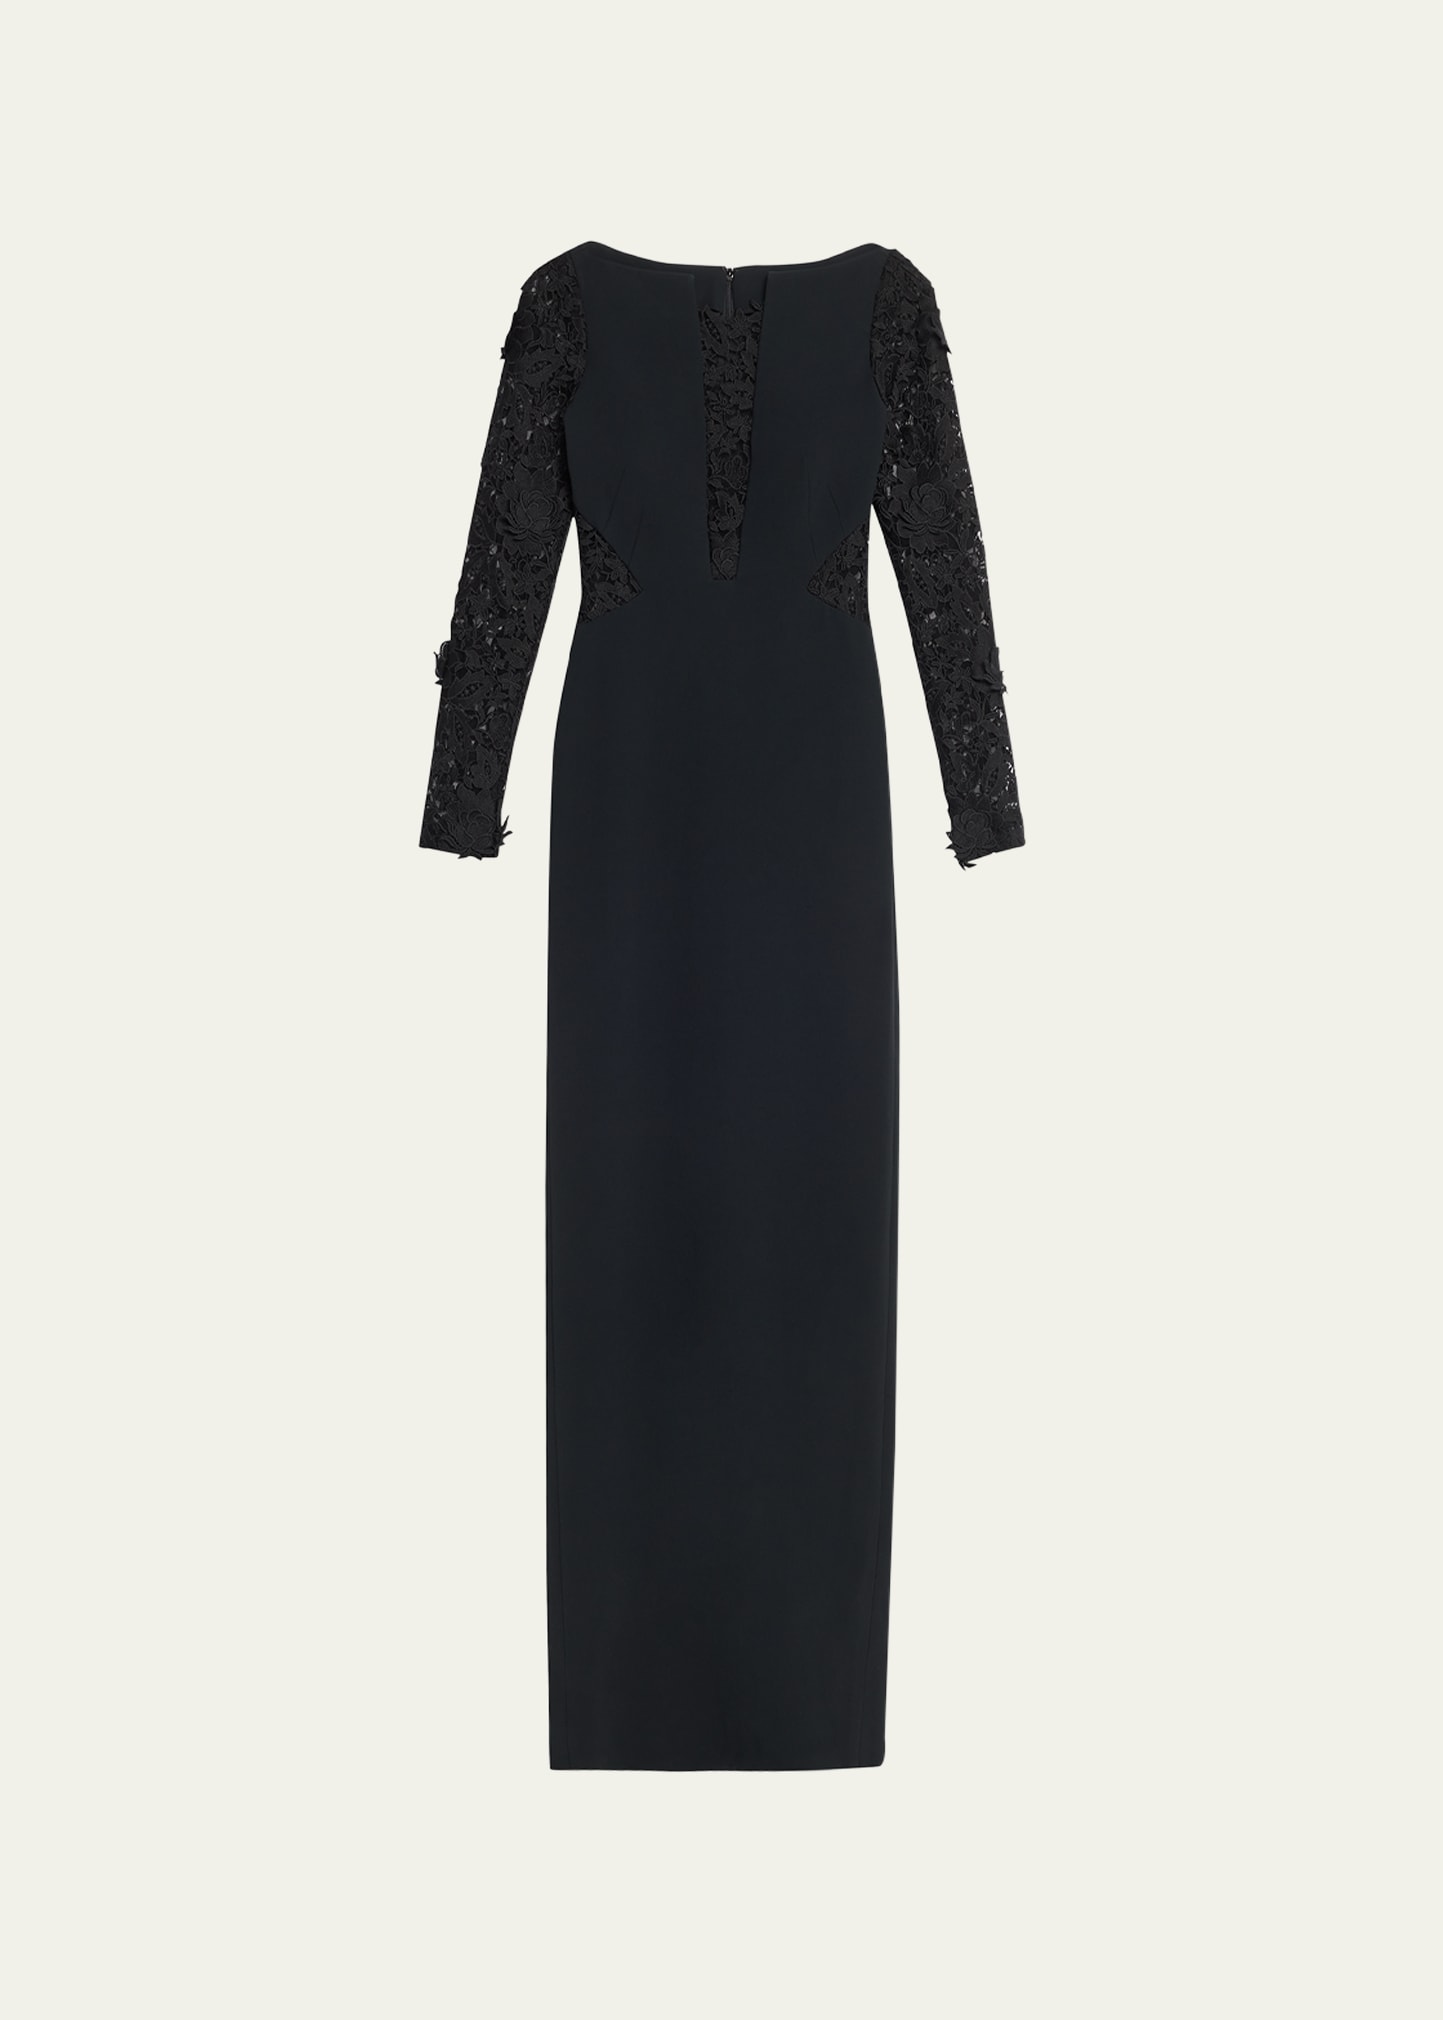 Black Crepe Gown with Lace Panels and Sleeves